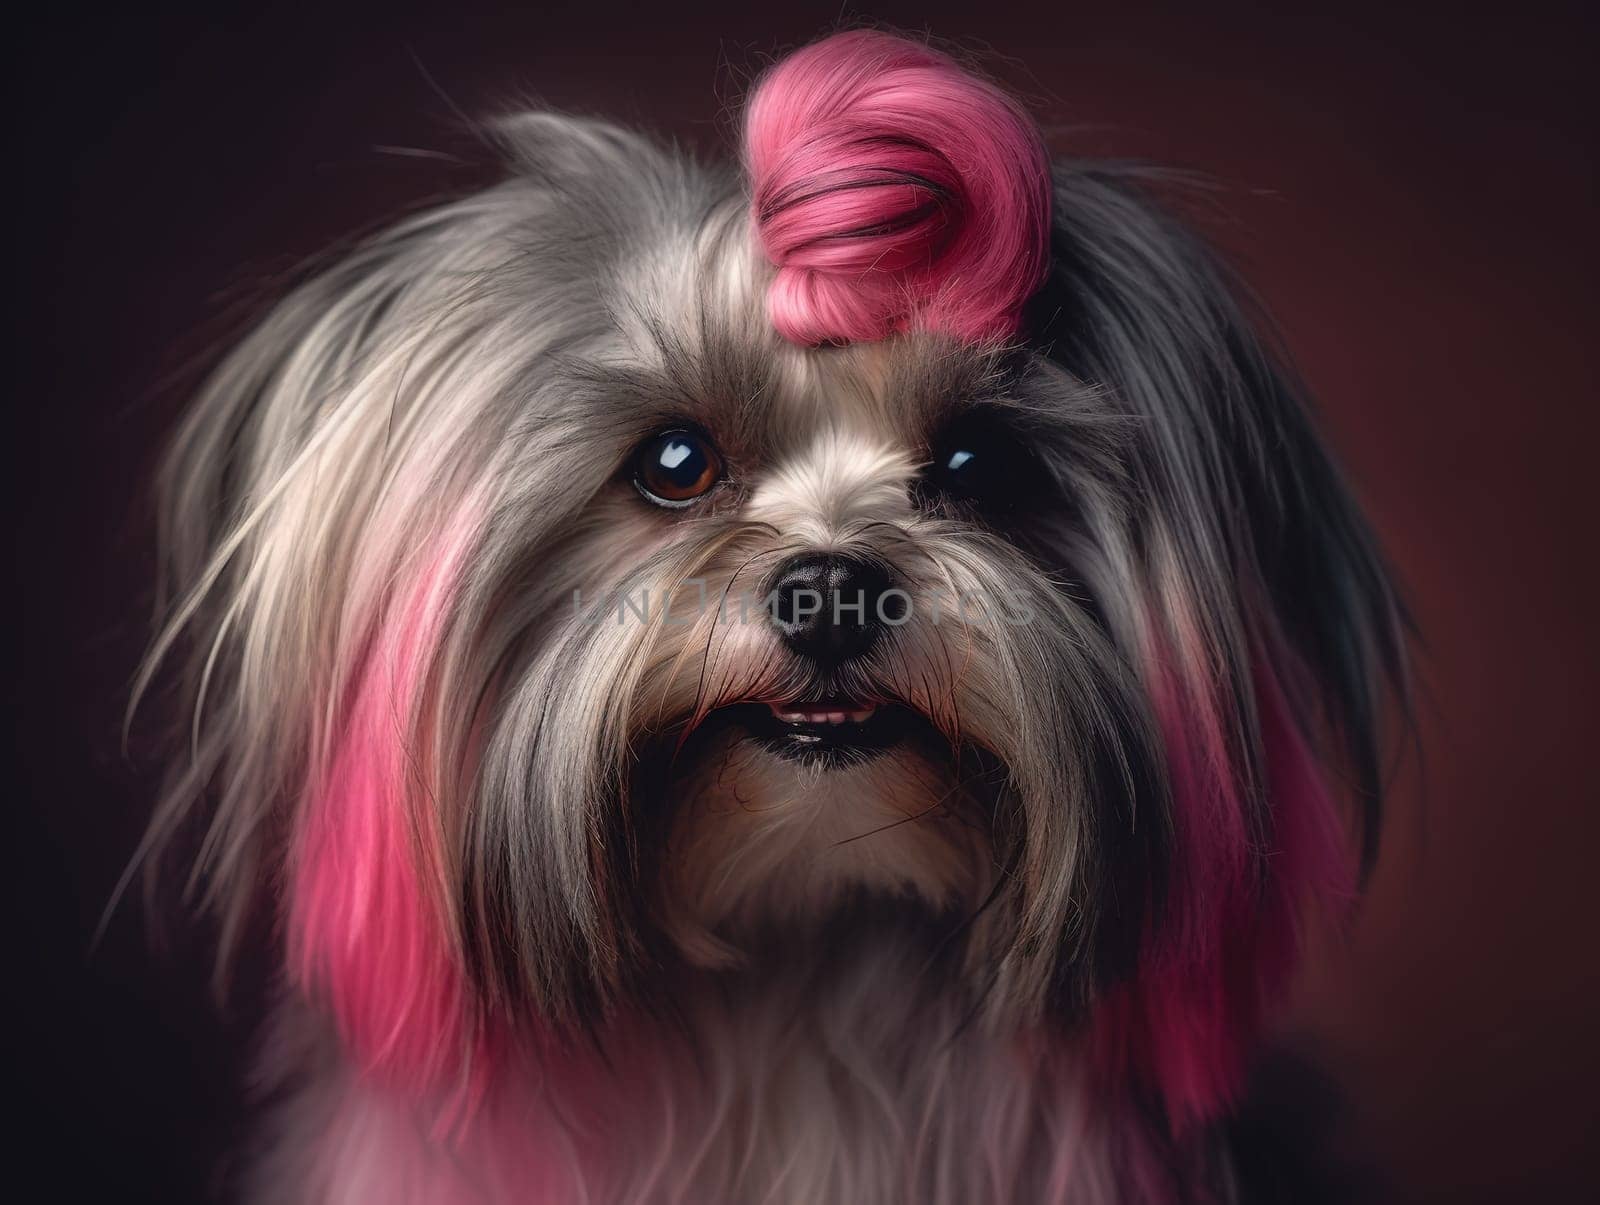 Cute Little White Yorkshire Terrier With Colored Hair by tan4ikk1